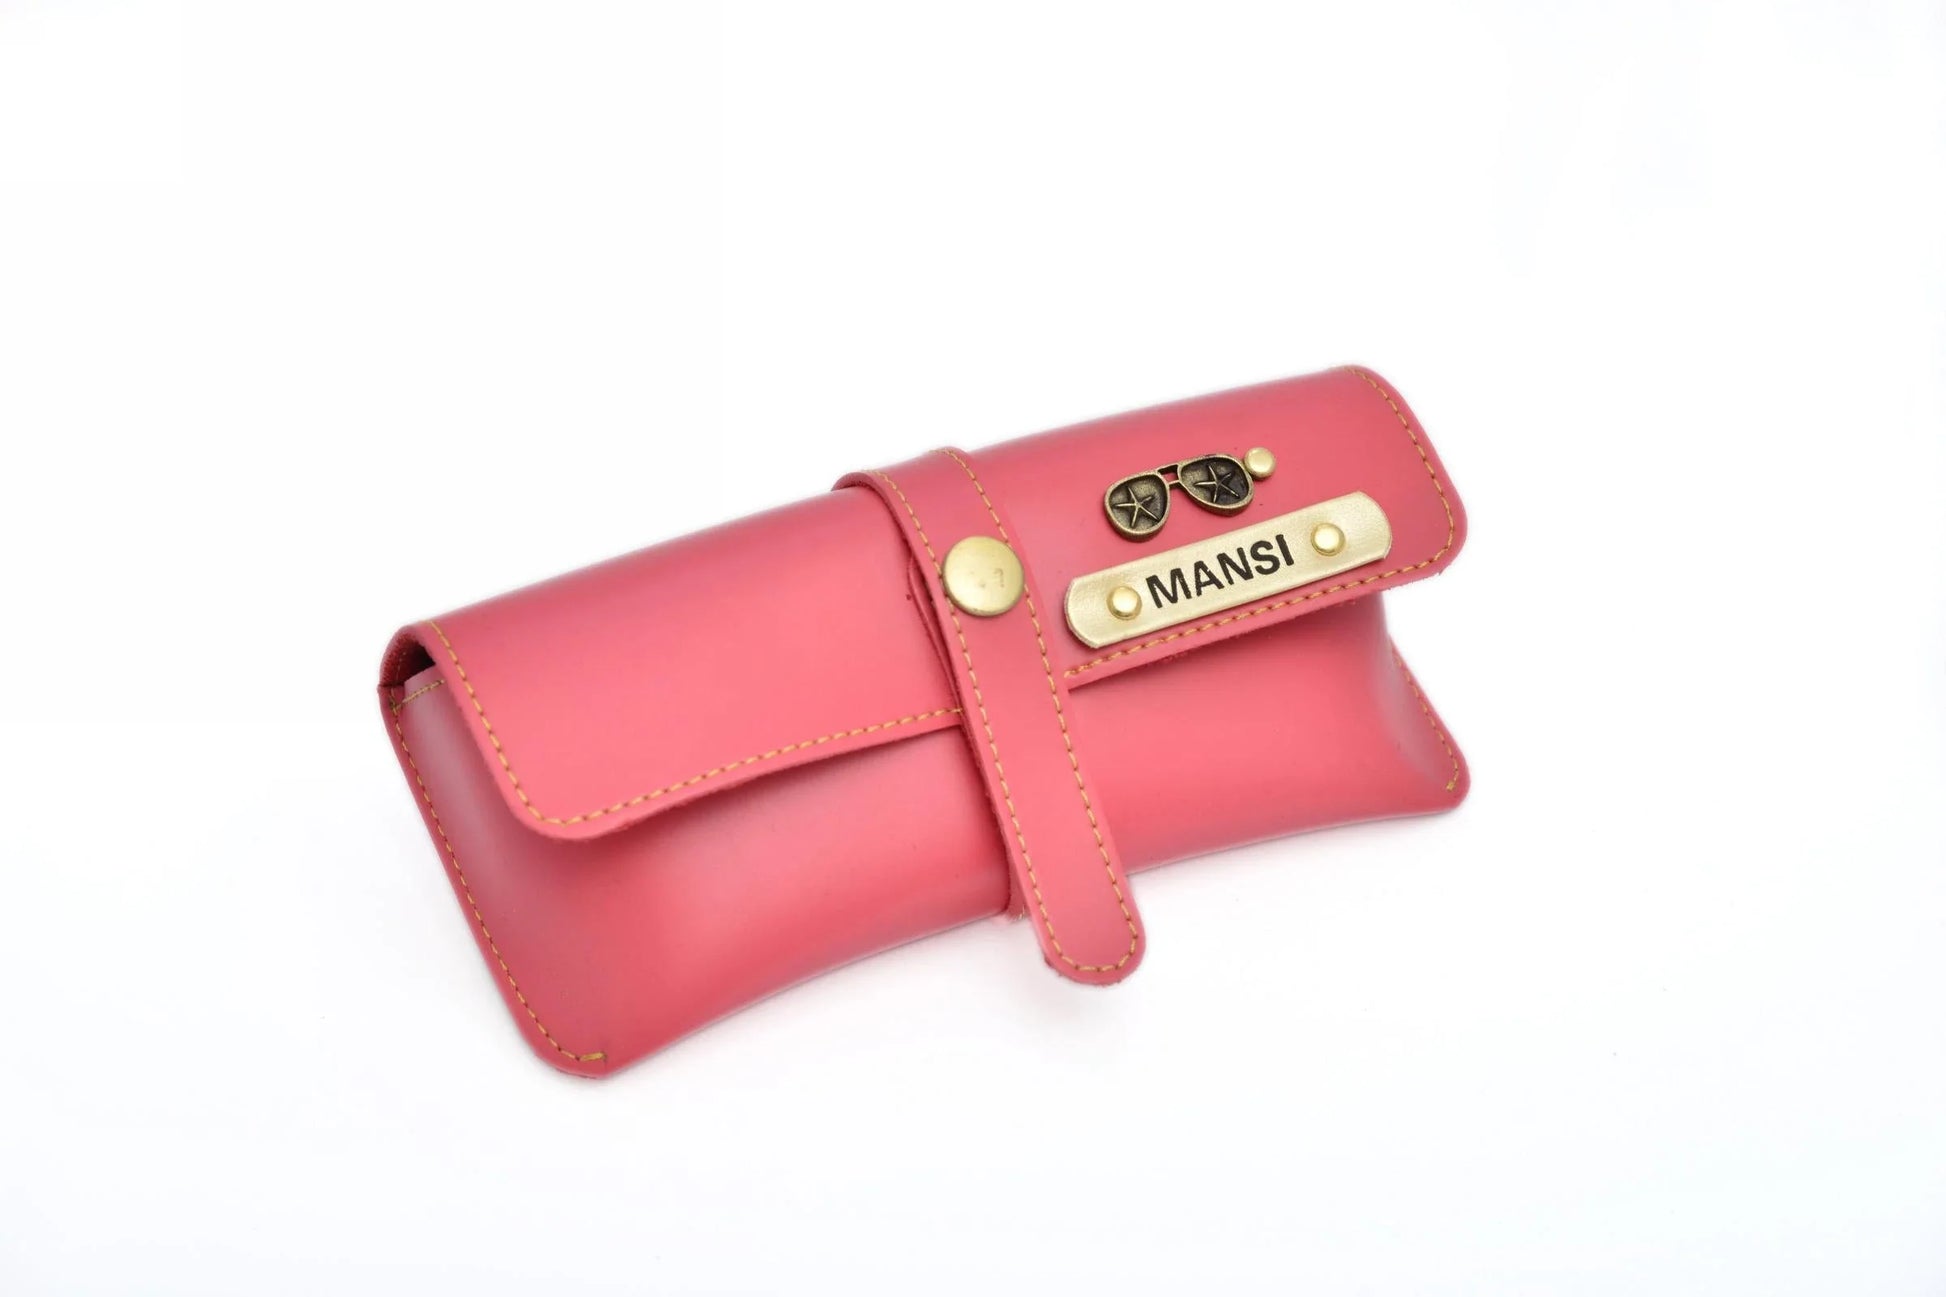 personalized-cb03-pink-customized-best-gift-for-boyfriend-girlfriend.So, protect your eyewear too and make it look modern by getting your very own classy, personalized unisex leather glass case.  Add your name and charm to your favourite coloured eyewear case and live in style!   With a royal leathery finish and a top-notch material quality, these personalized unisex glass cases prove to be sturdy while looking stylish. They protect your eyewear from all sorts of stresses!